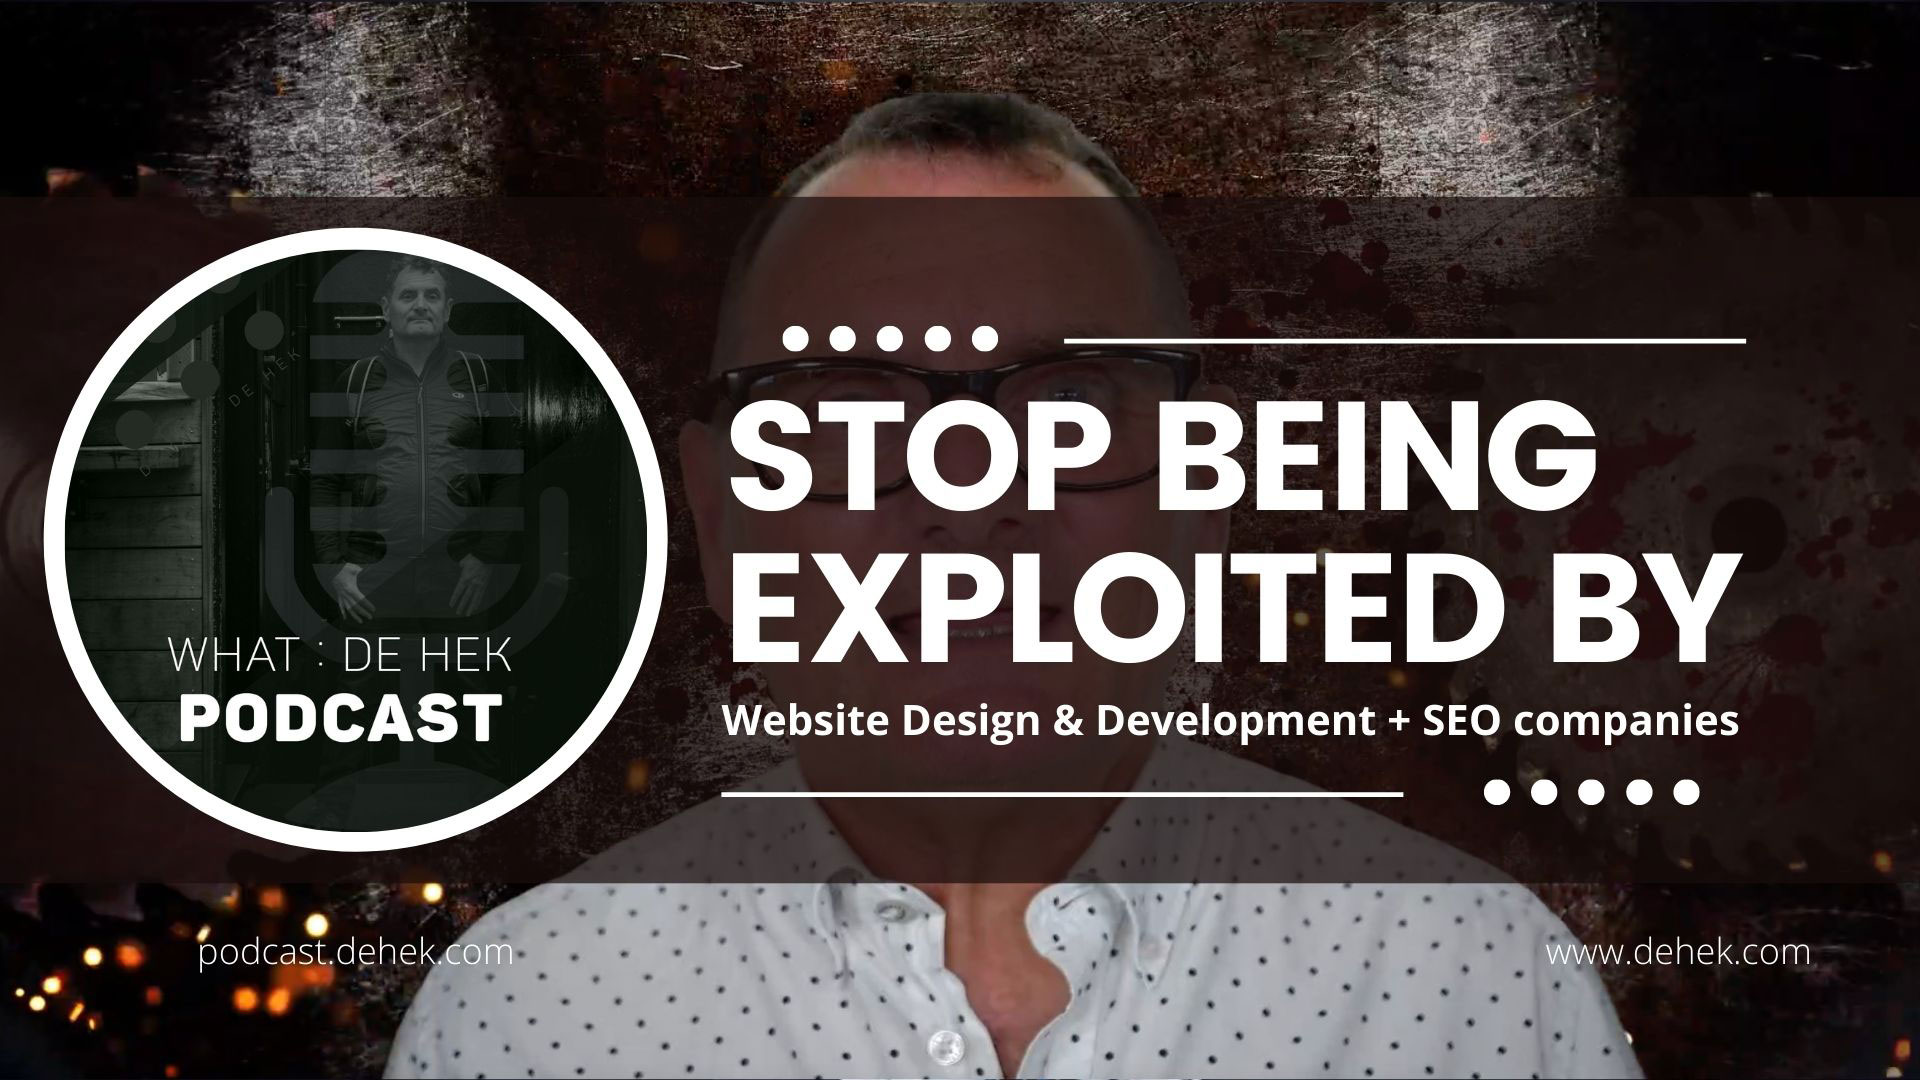 Stop being exploited by Website Design & Development + SEO companies